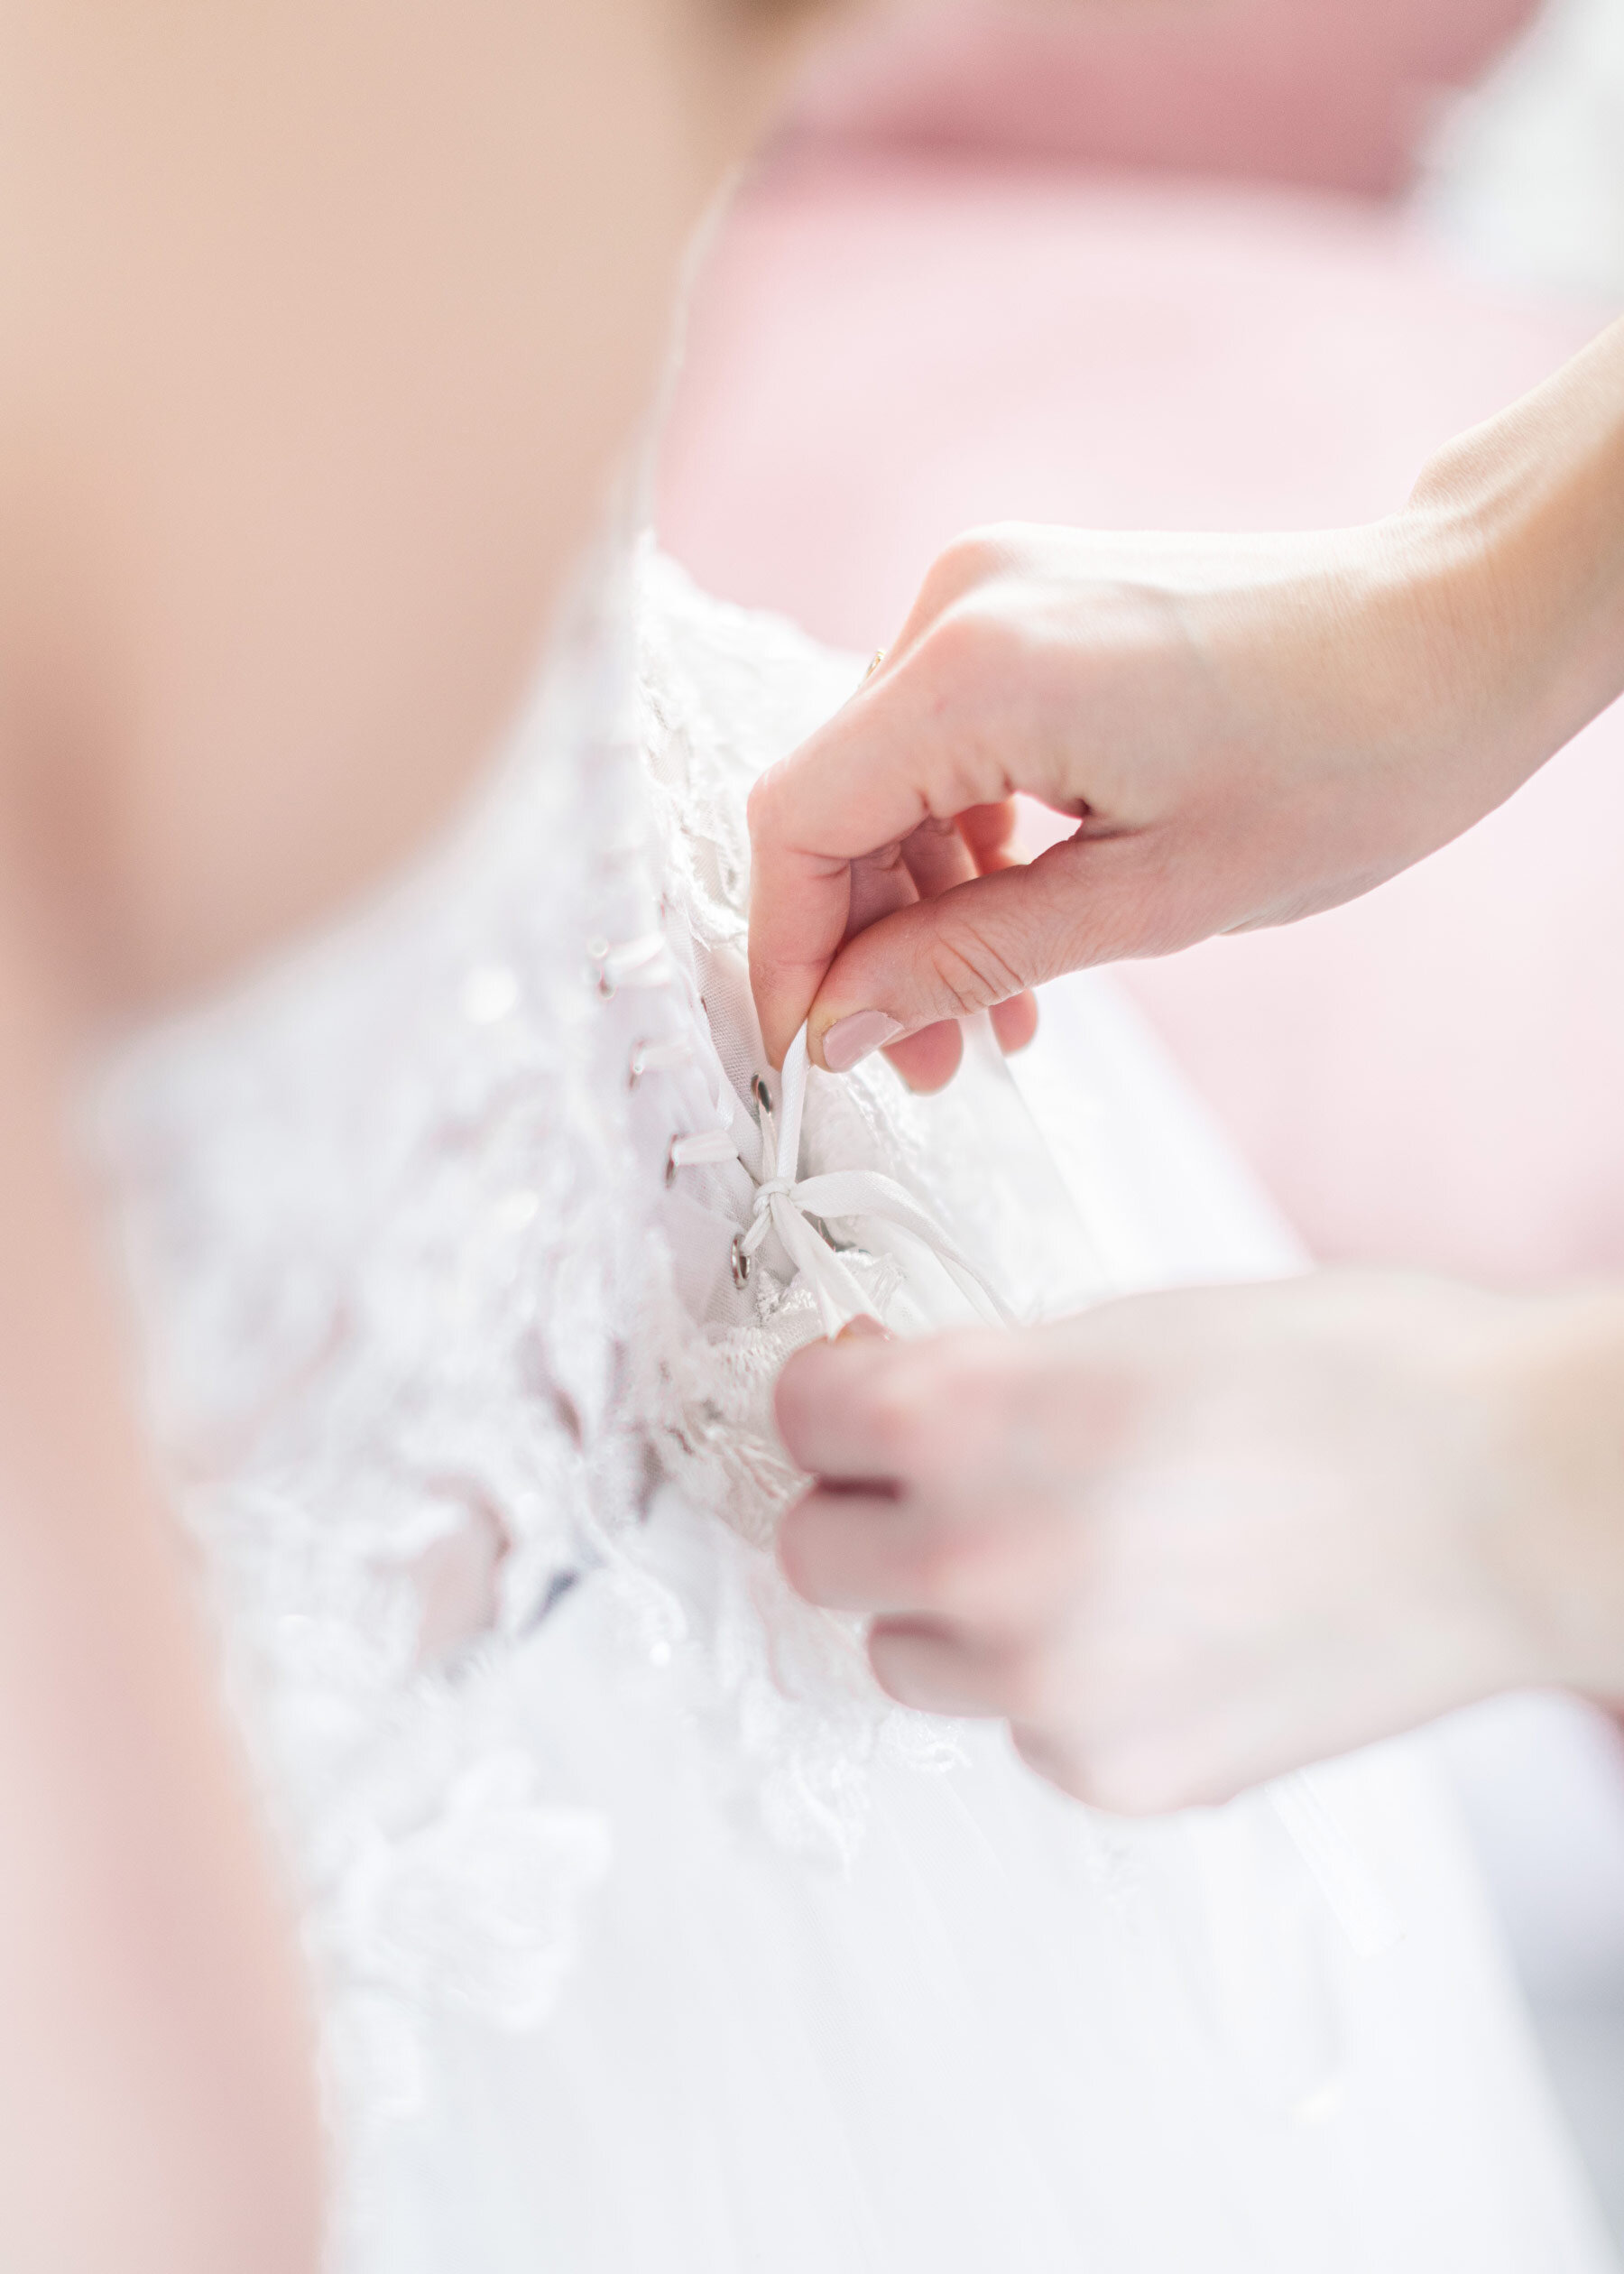  Utah Valley photographer, Clarity Lane captures this mother of the bride tying up her daughter's wedding dress on her wedding morning. corset wedding dress back mother tying wedding dress on wedding morning Utah Vally wedding photographer #ClarityLa